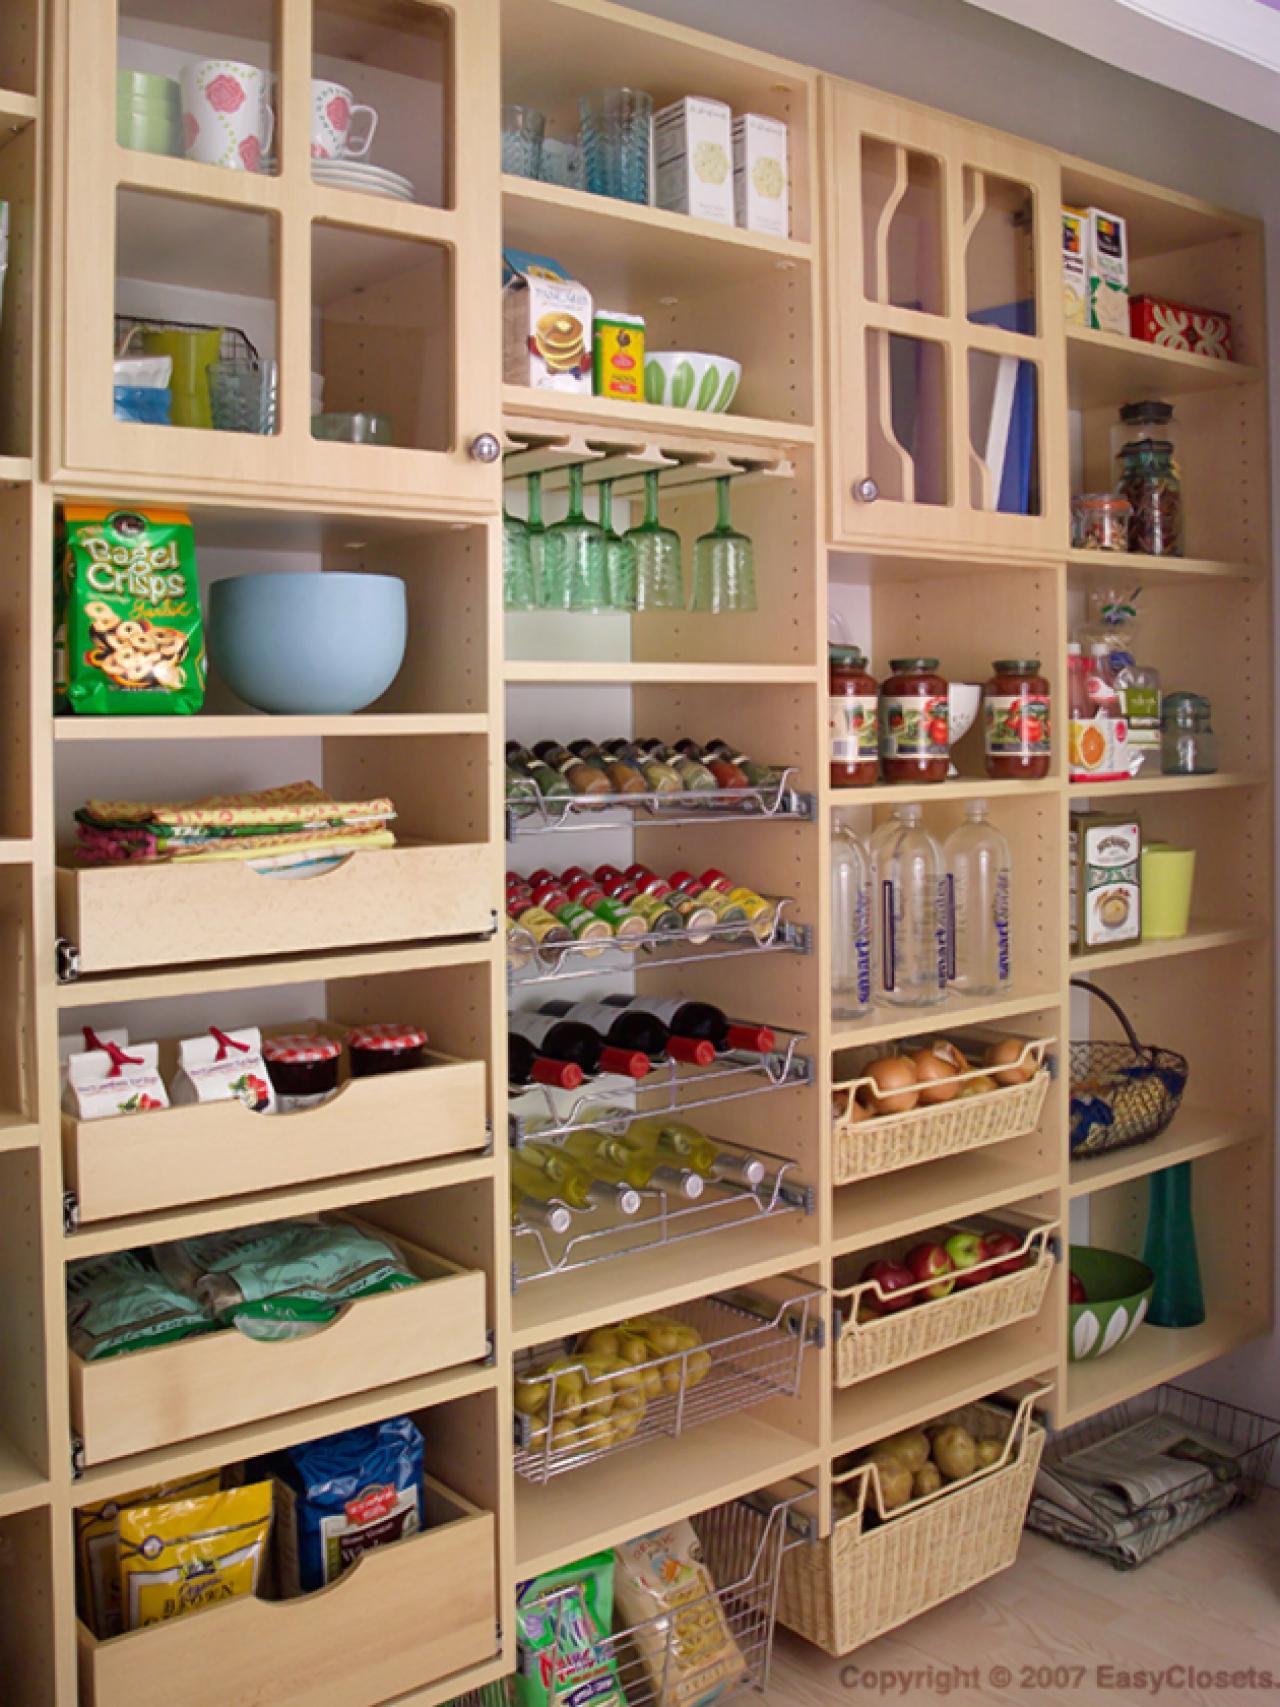 15 Ideas To Reorganize Your Kitchen Effectively Diy